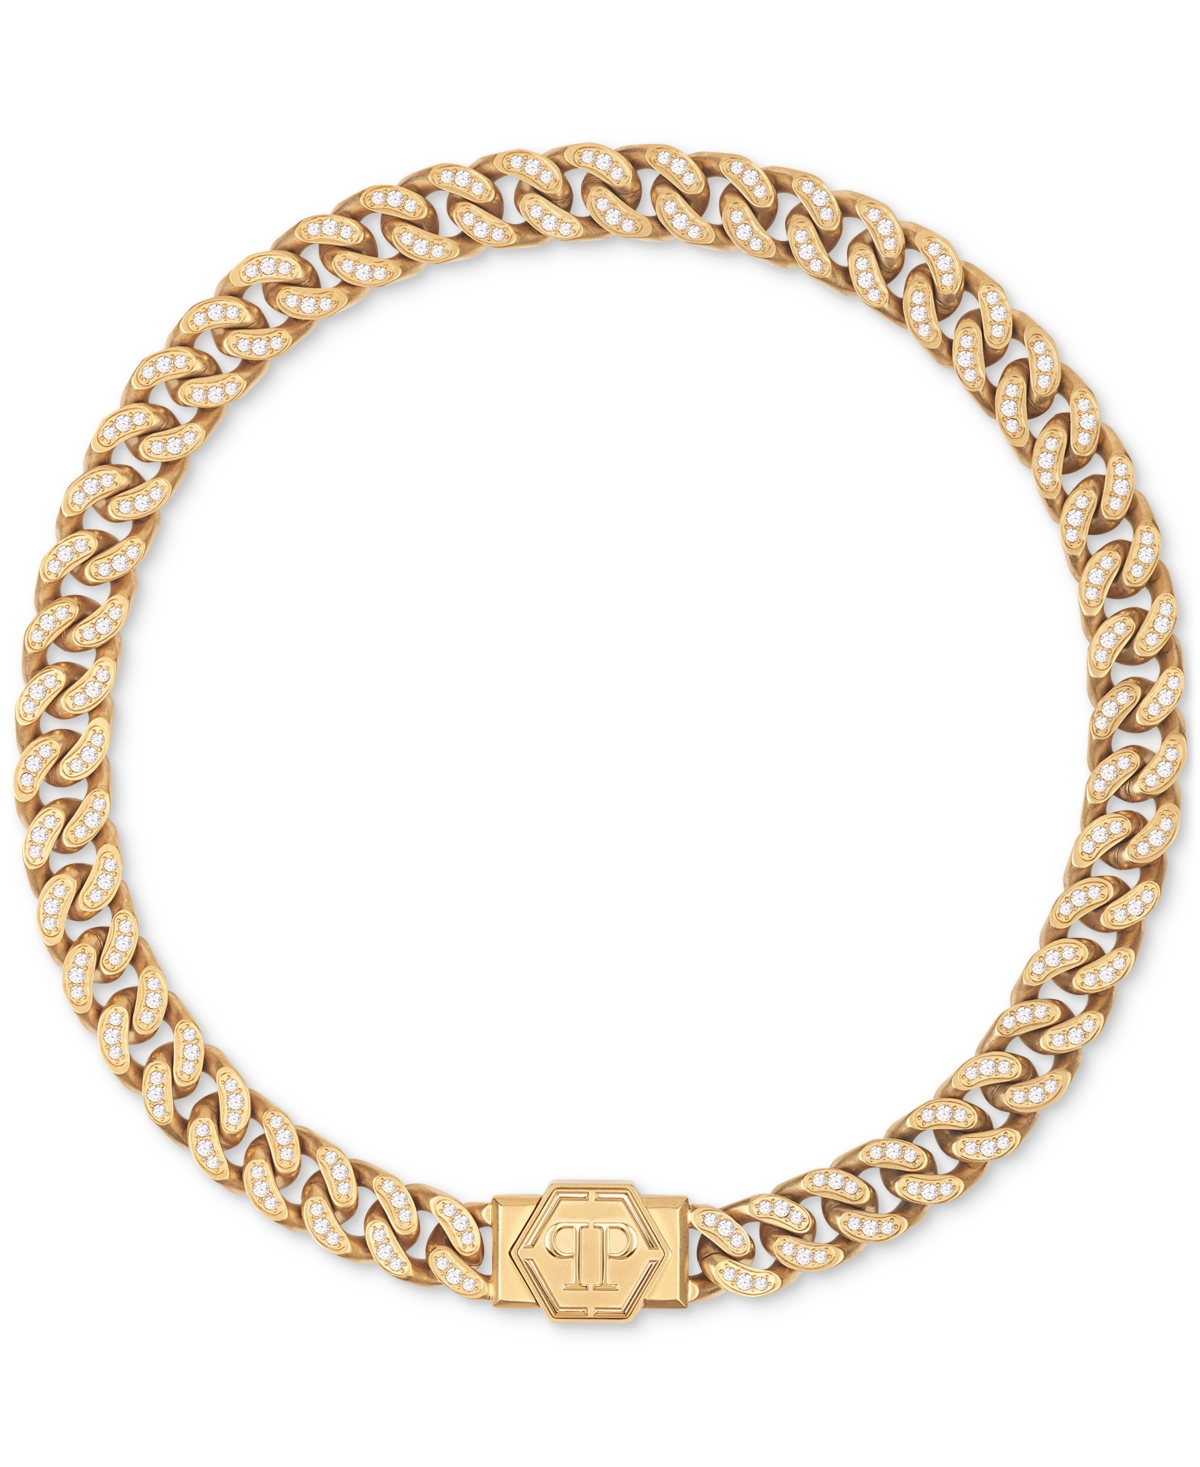 PHILIPP PLEIN GOLD-TONE IP STAINLESS STEEL HEXAGON LOGO PAVE CUBAN LINK NECKLACE